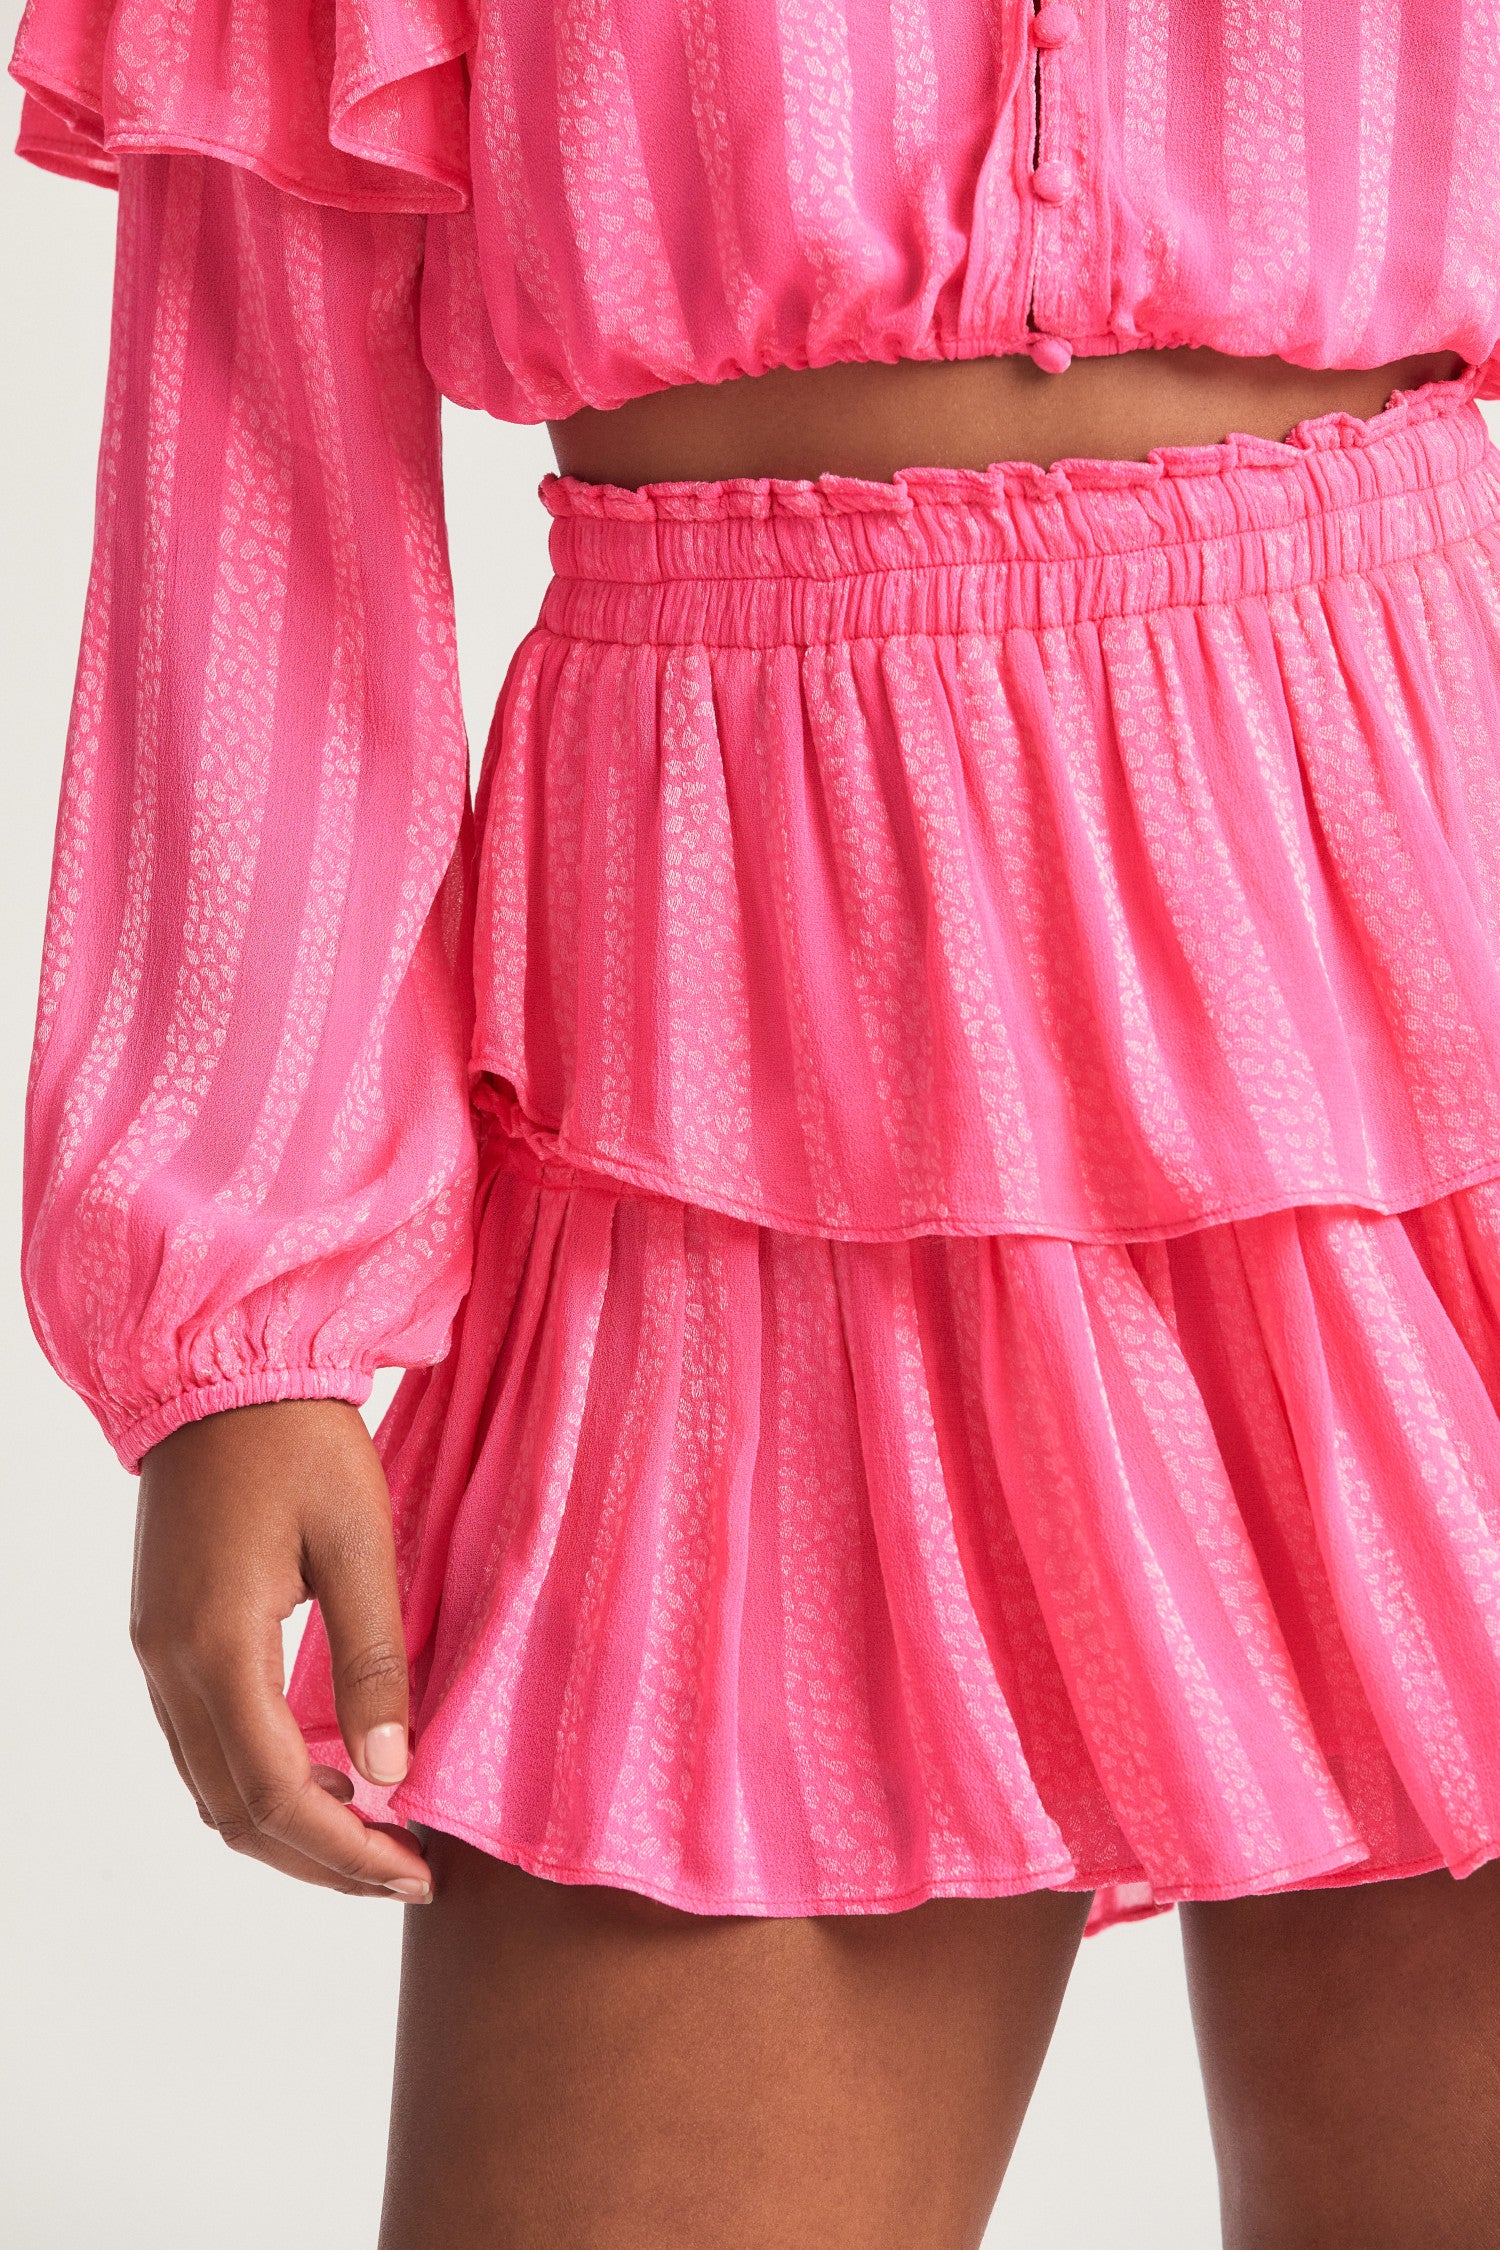 Pink mini skirt in viscose fabric with bow print. The two-tiered short skirt, with an elasticated waistband and shirred flounces.